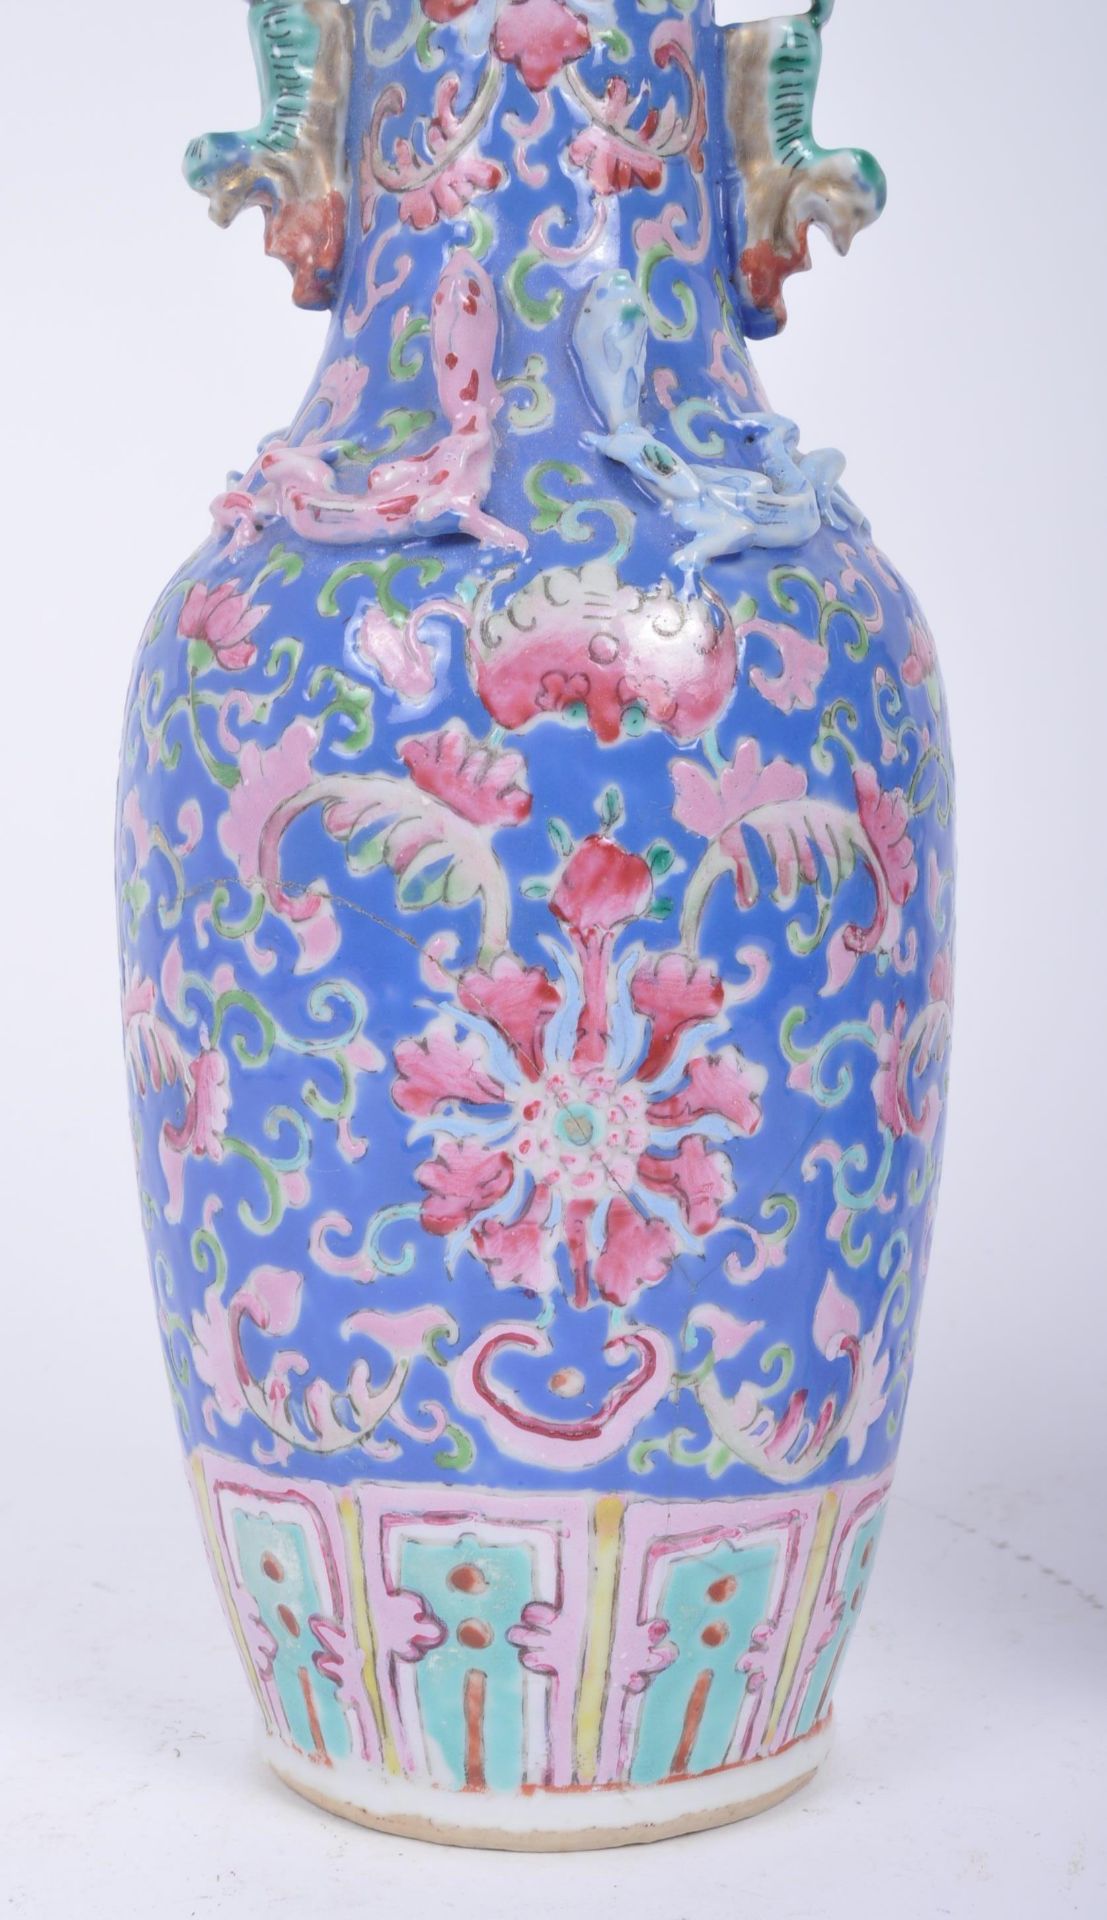 PAIR OF LATE 19TH CENTURY CHINESE CERAMIC FAMILLE ROSE VASES - Image 3 of 6